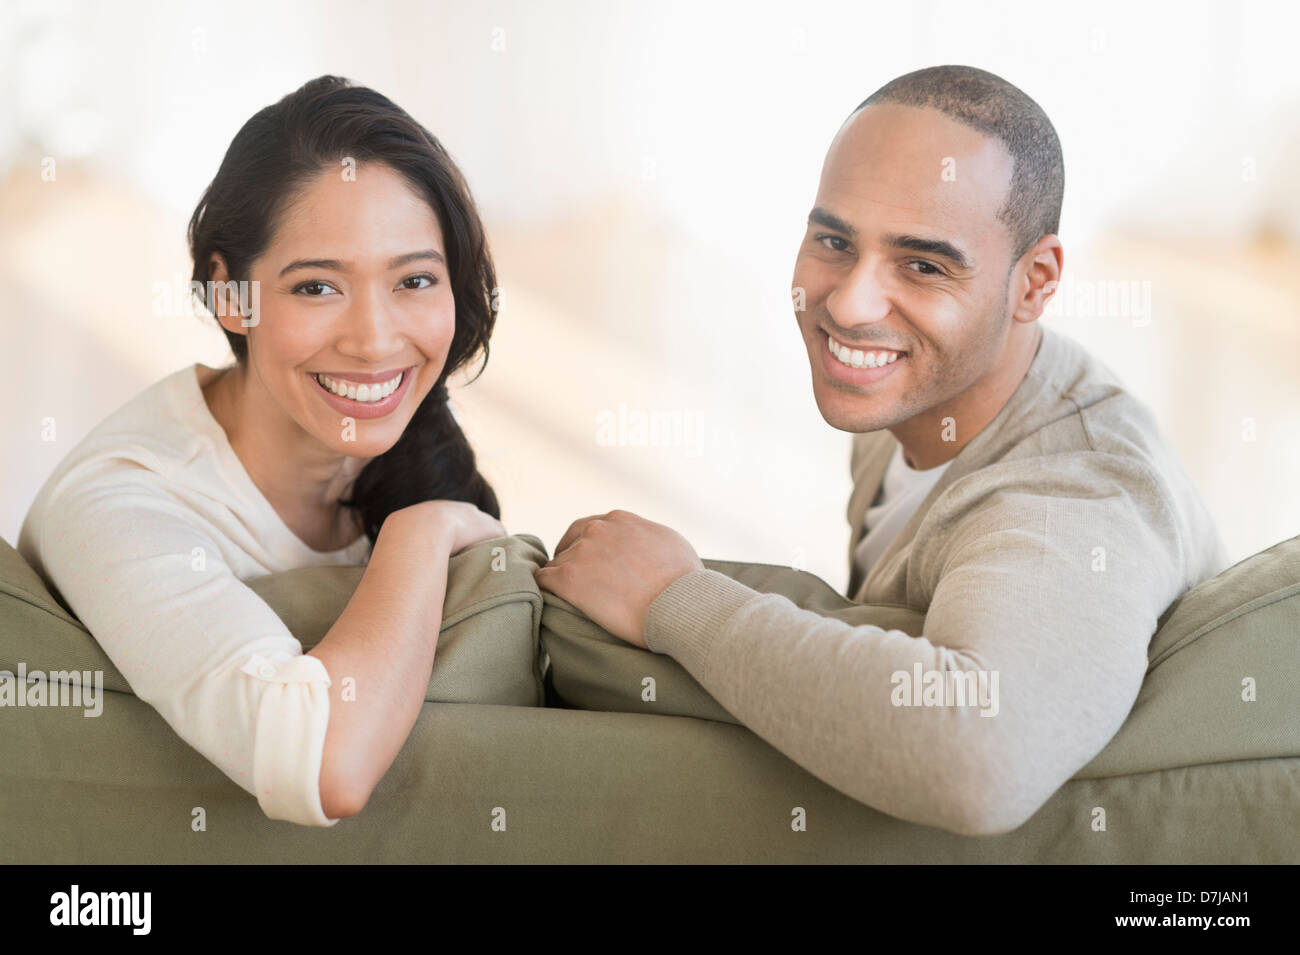 Portrait of young couple sitting on couch Banque D'Images